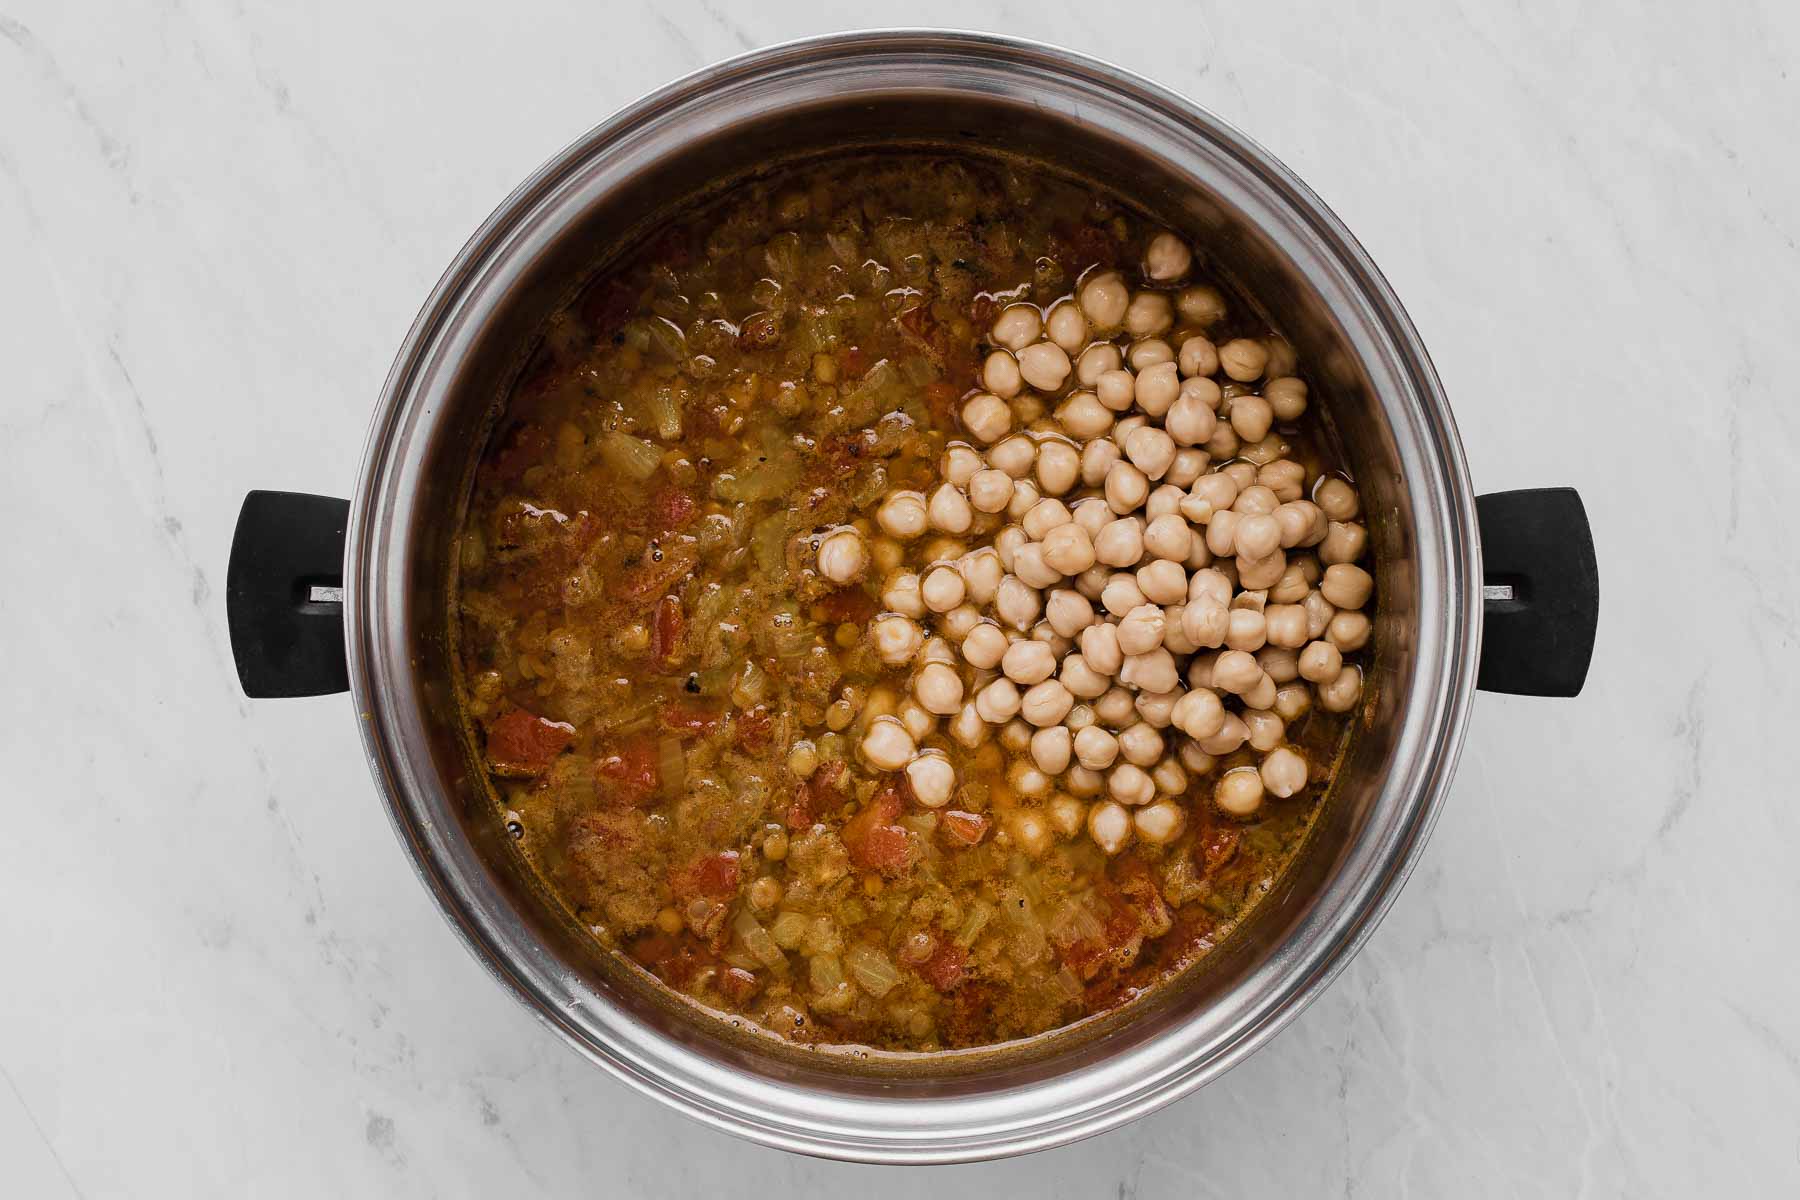 Adding chickpeas to a pot of brown stew on the stove.